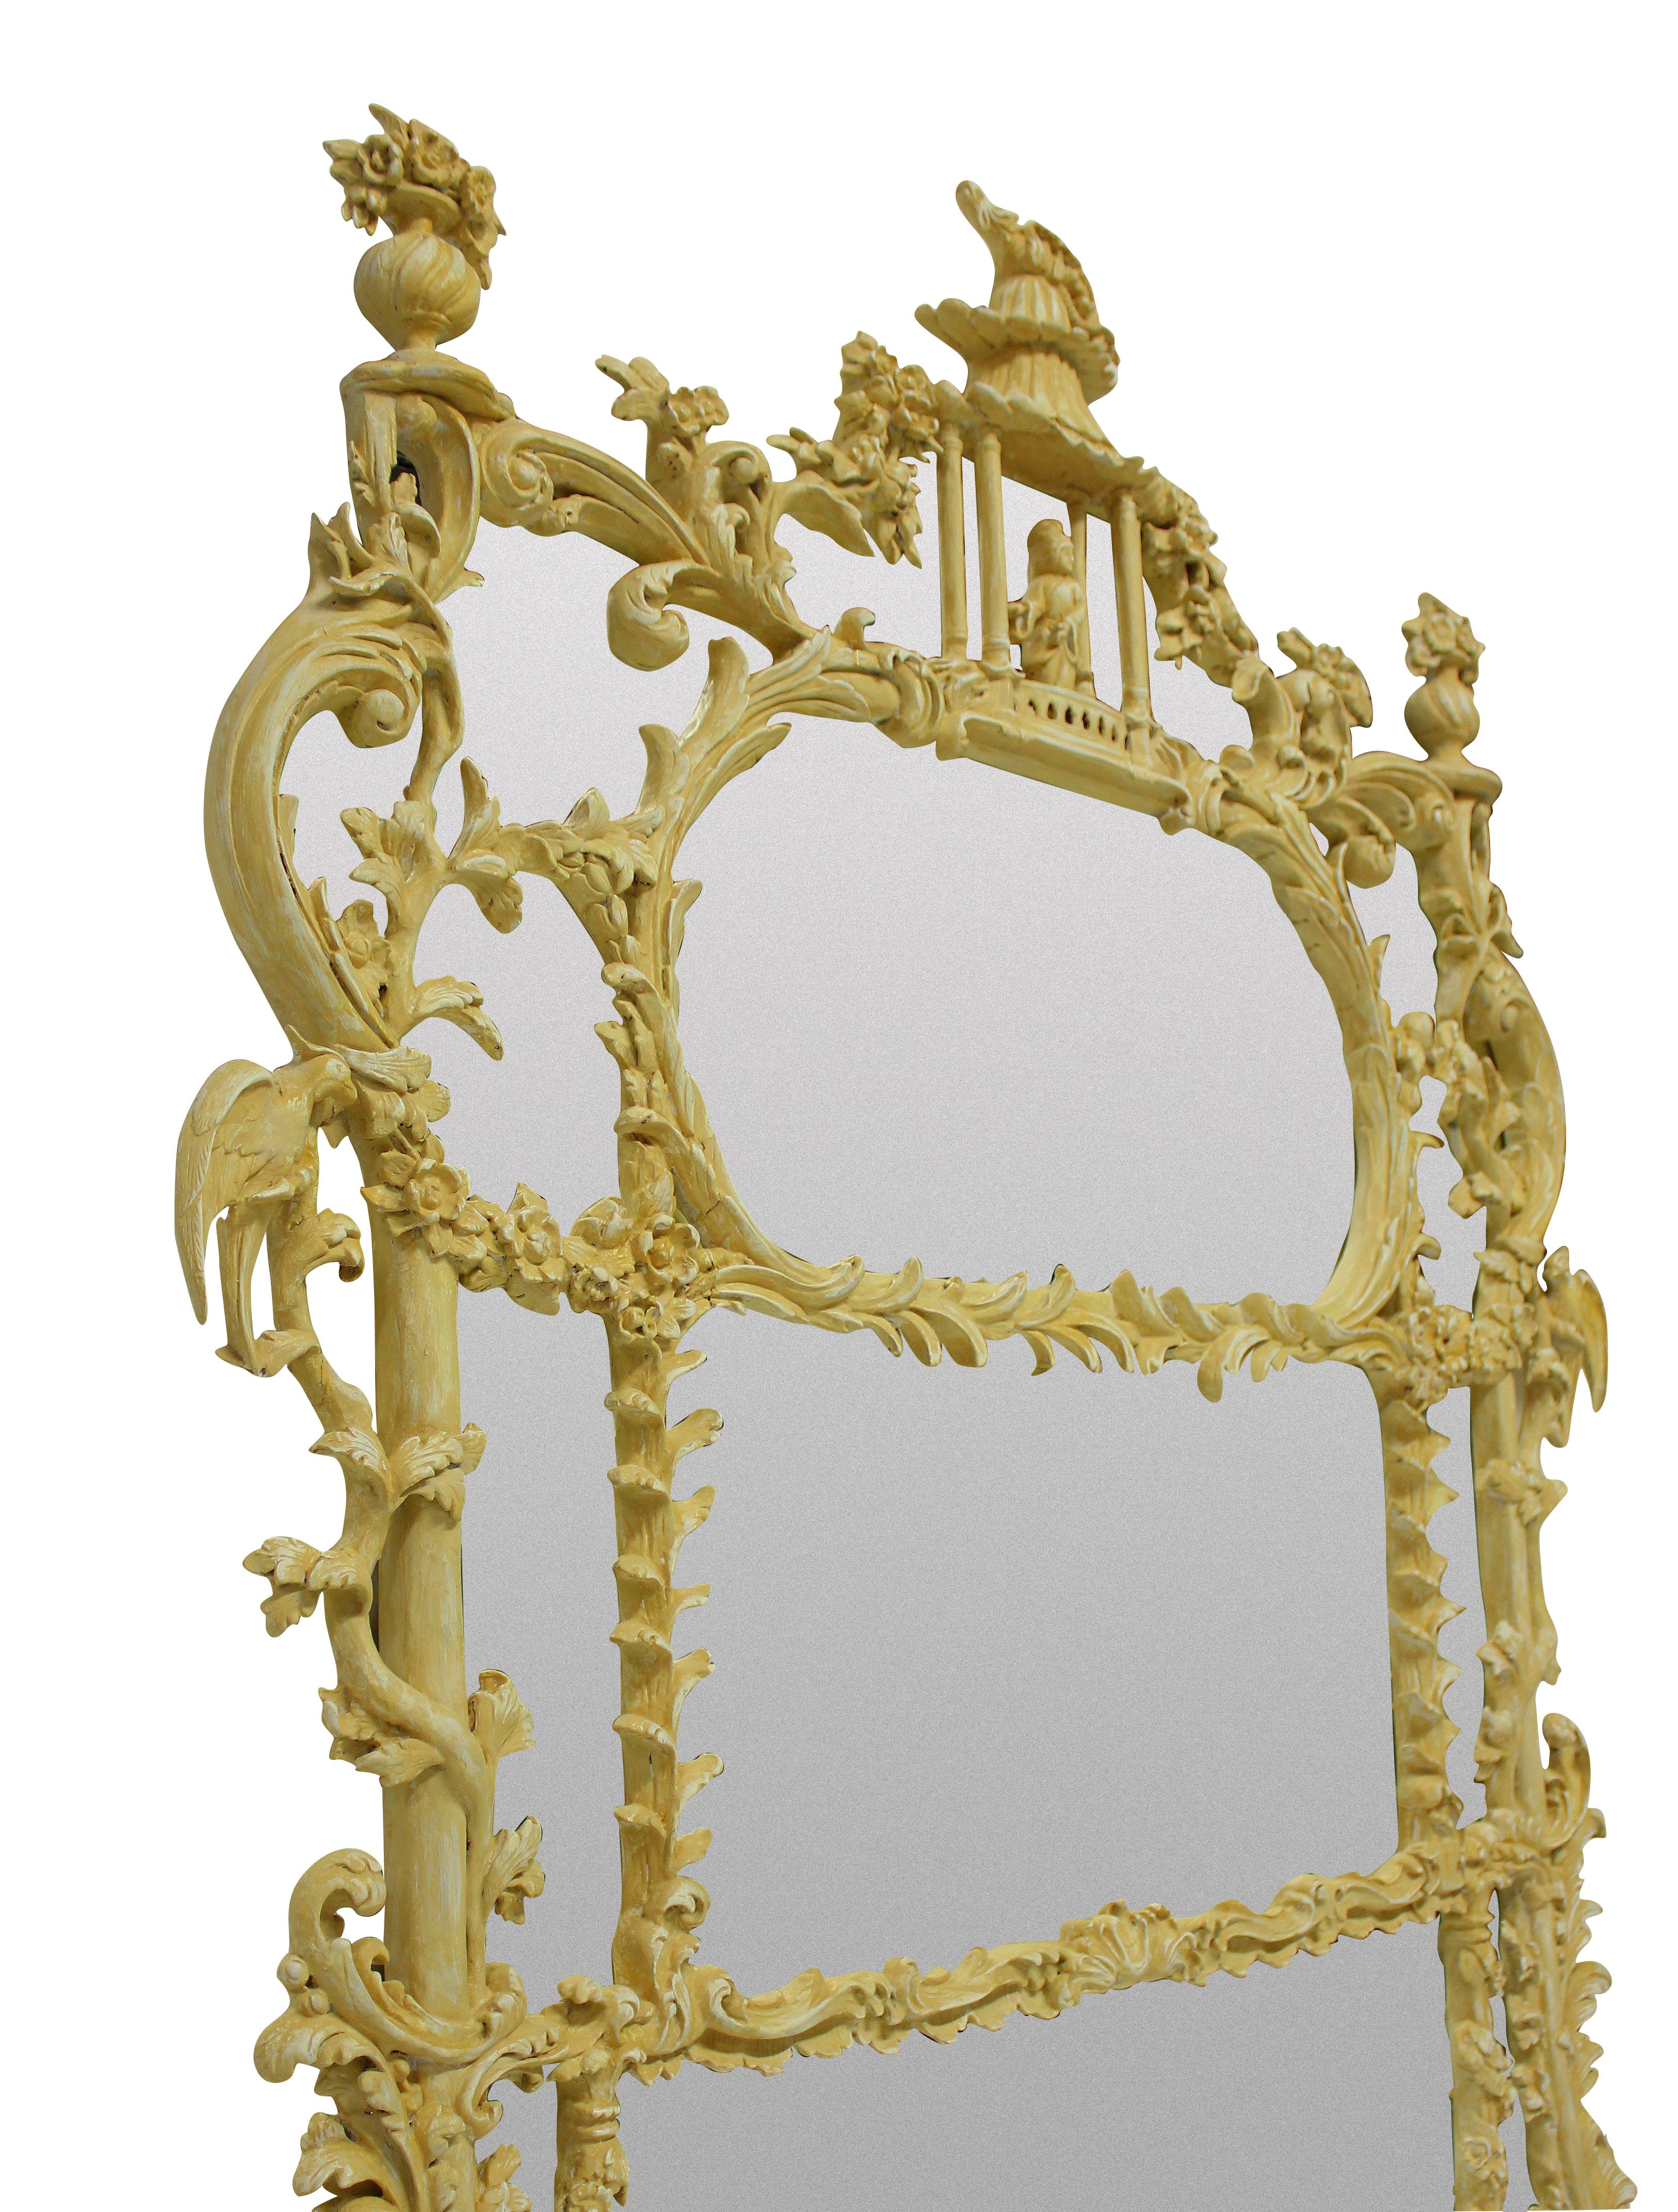 A beautifully carved Chinese Chippendale revival overmantel mirror in ochre bole. Depicting foliage, ho birds and flowers with a central pagoda and figure at the top.